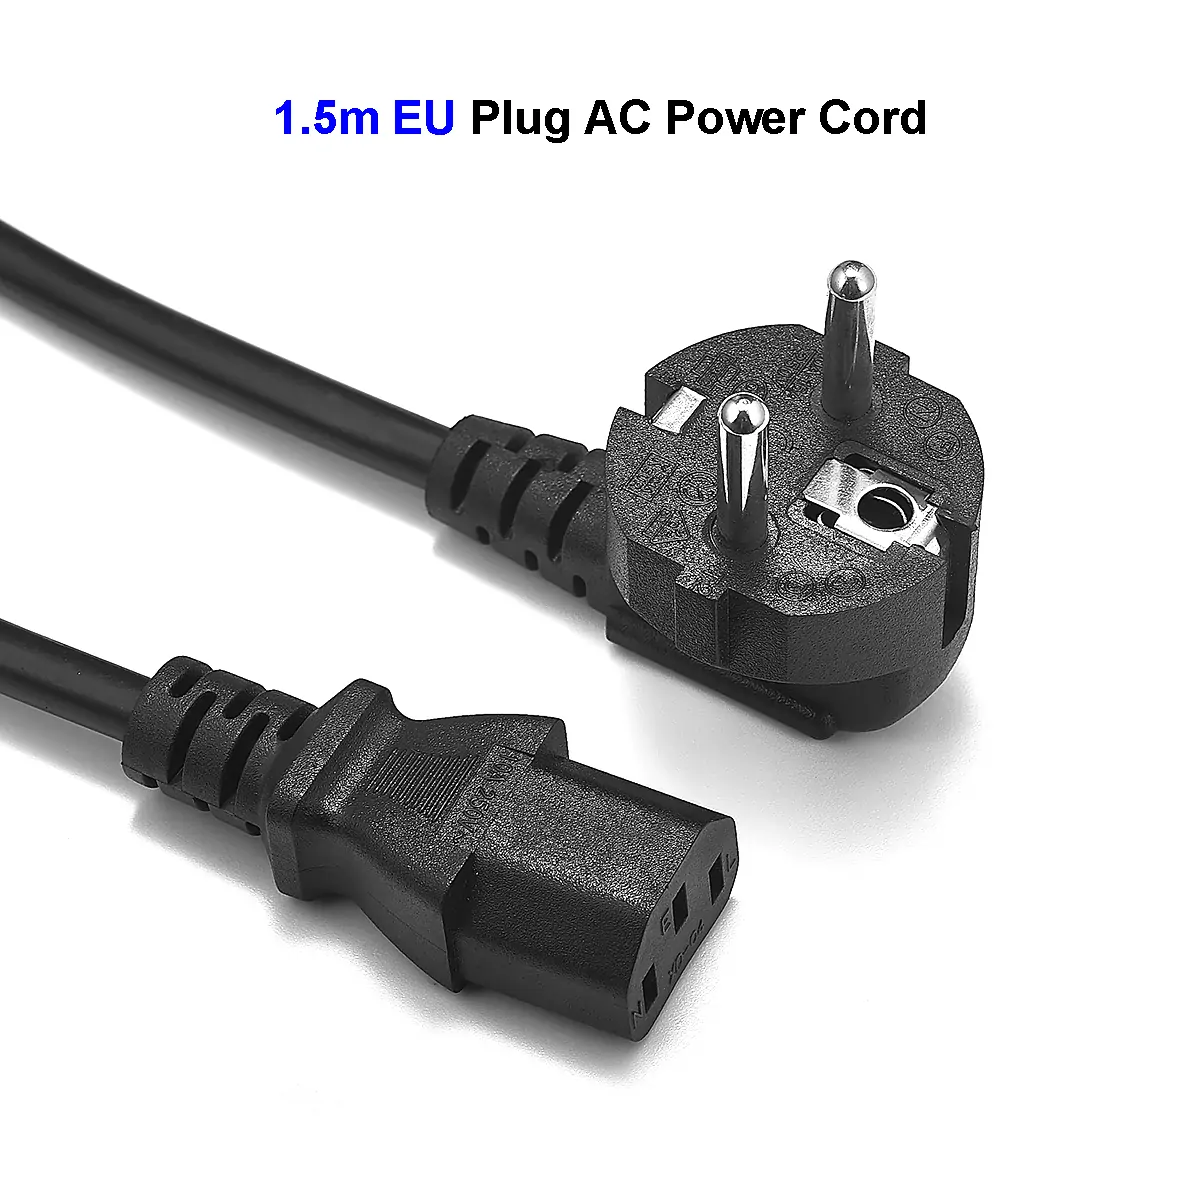 1.5m plug AC power cord 2 Pin Prong IEC C13 European Power Cord 5ft AC Adapter PC Computer Monitor Printer LCD TV - cord manufacturers | power cable manufacturers | power cord suppliers